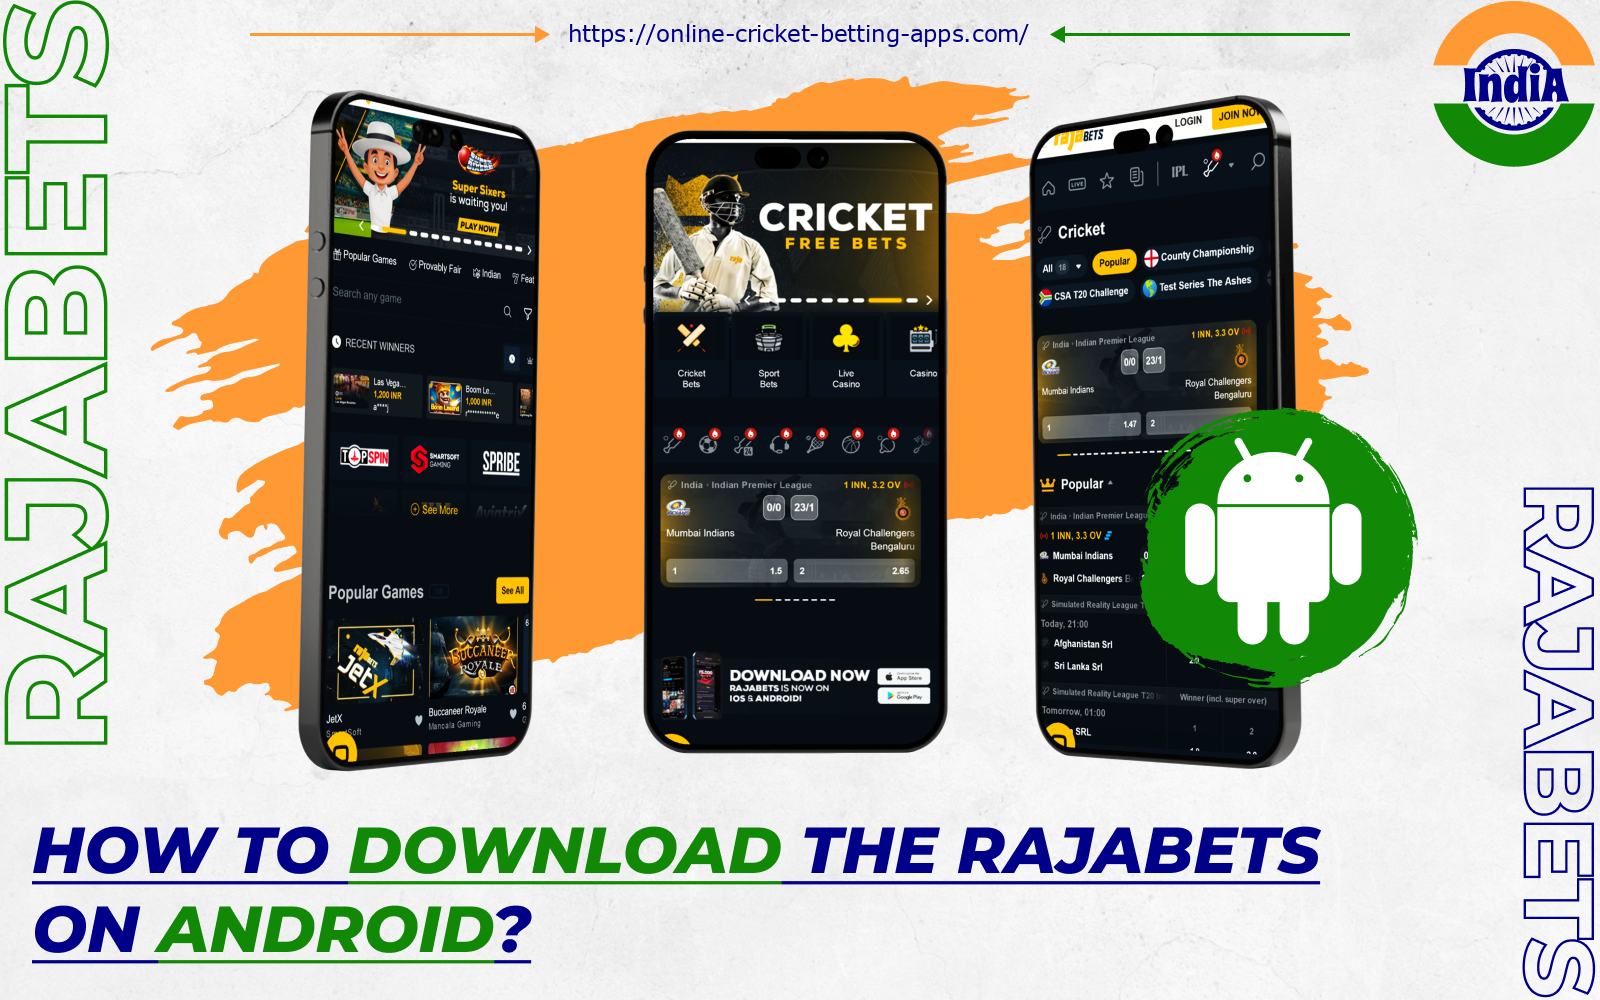 The Rajabets app can be downloaded to any Android device after which all betting options will be available